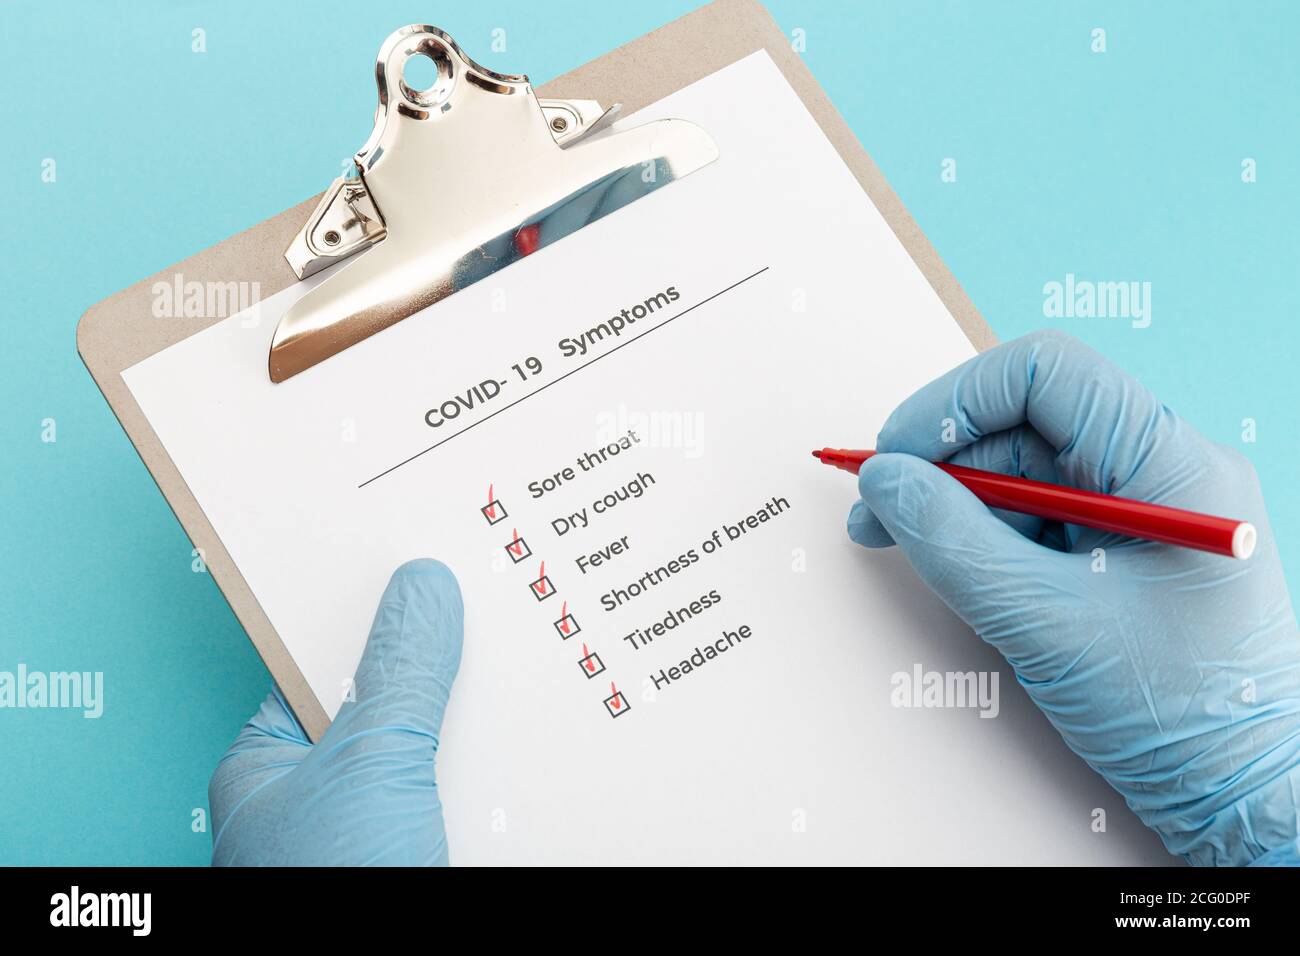 Hands wearing protectives gloves holding a Checklist On Clipboard with COVID-19 symptoms Stock Photo